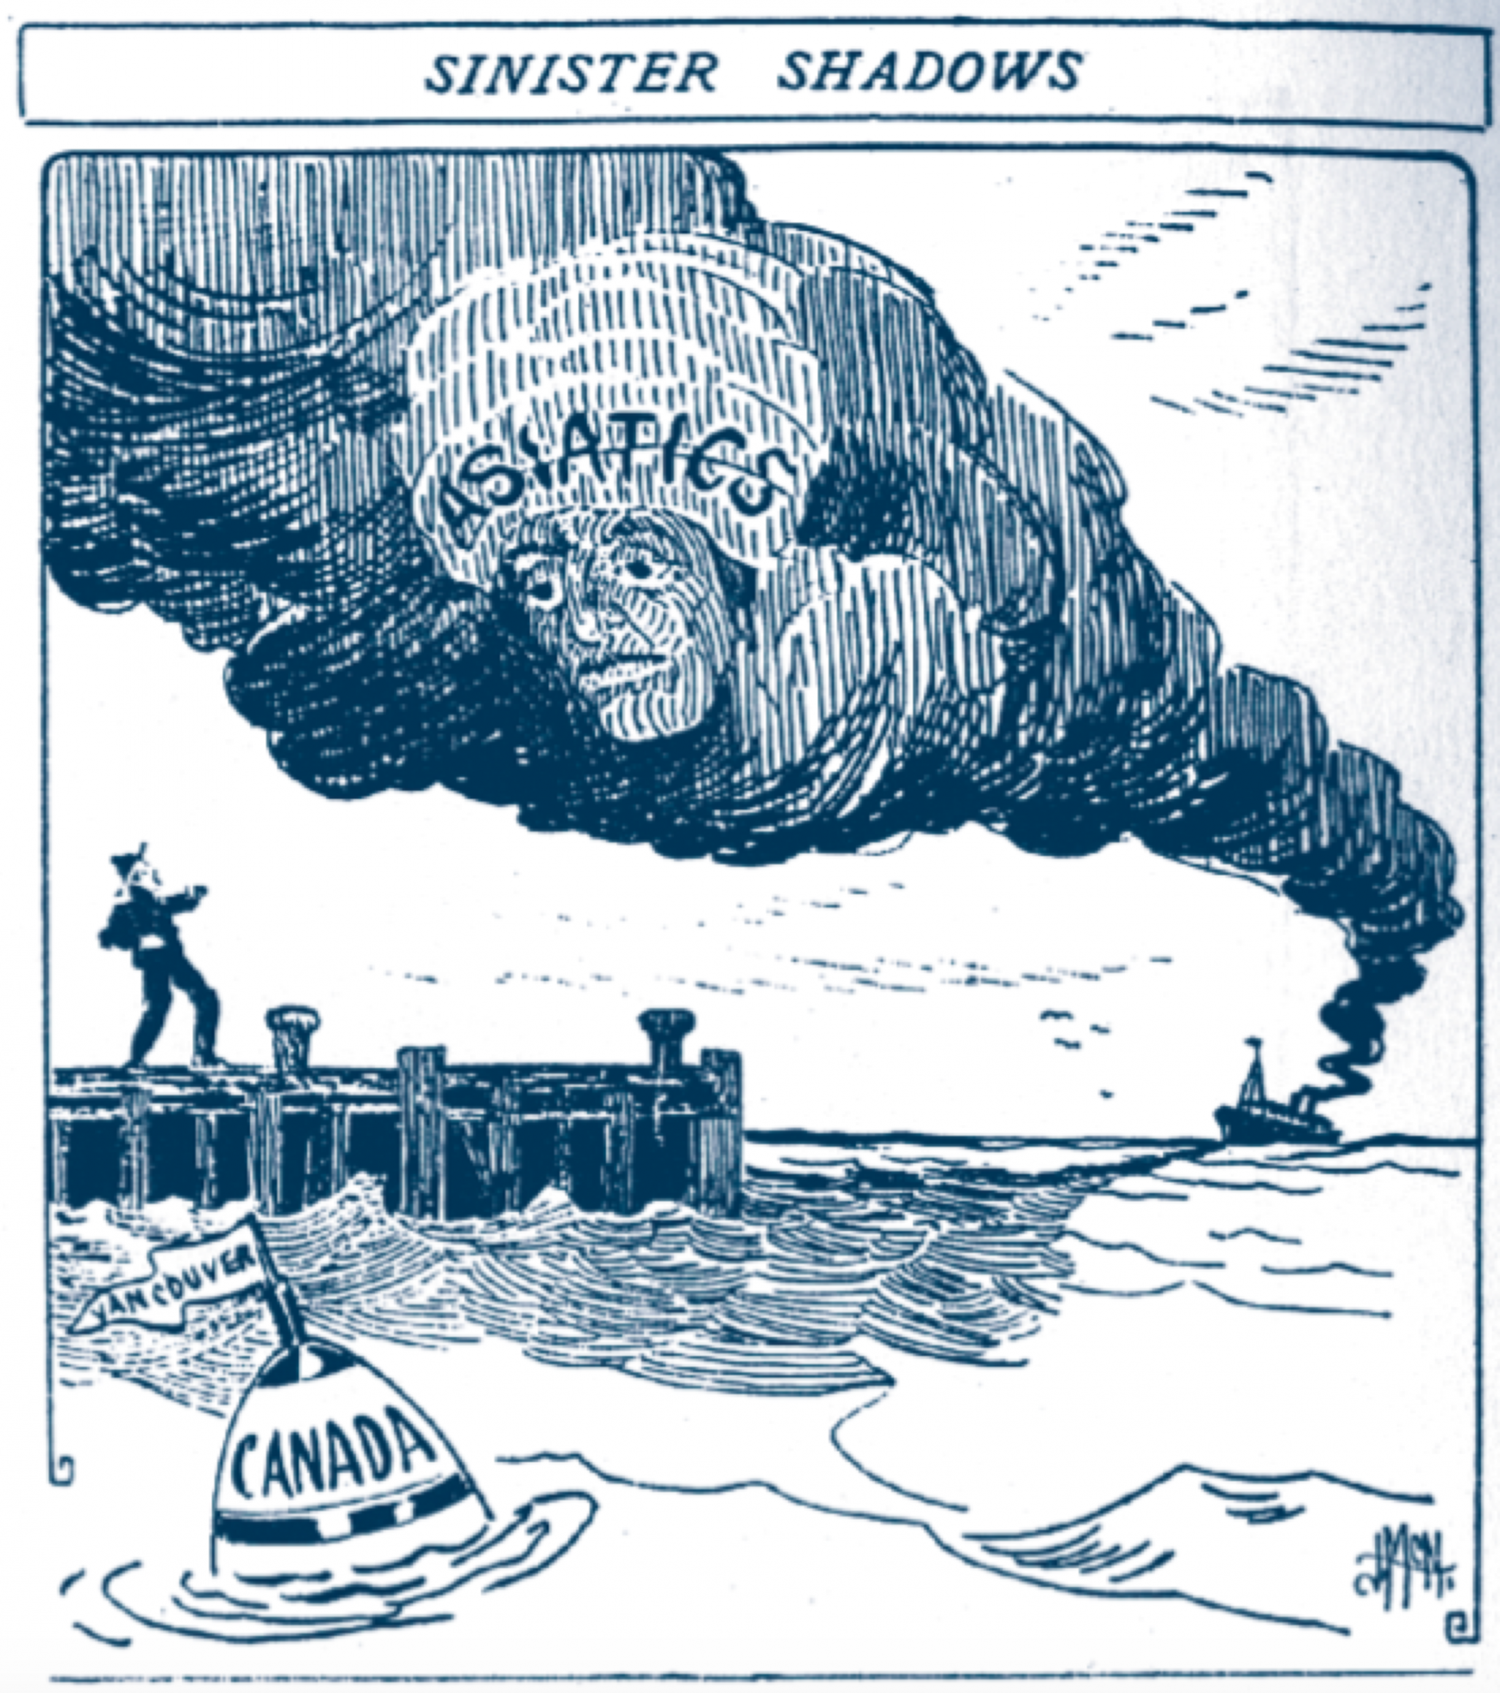 A political cartoon with a stereotypical drawing of an “Asiatic” in smoke from a ship, looming over Vancouver docks